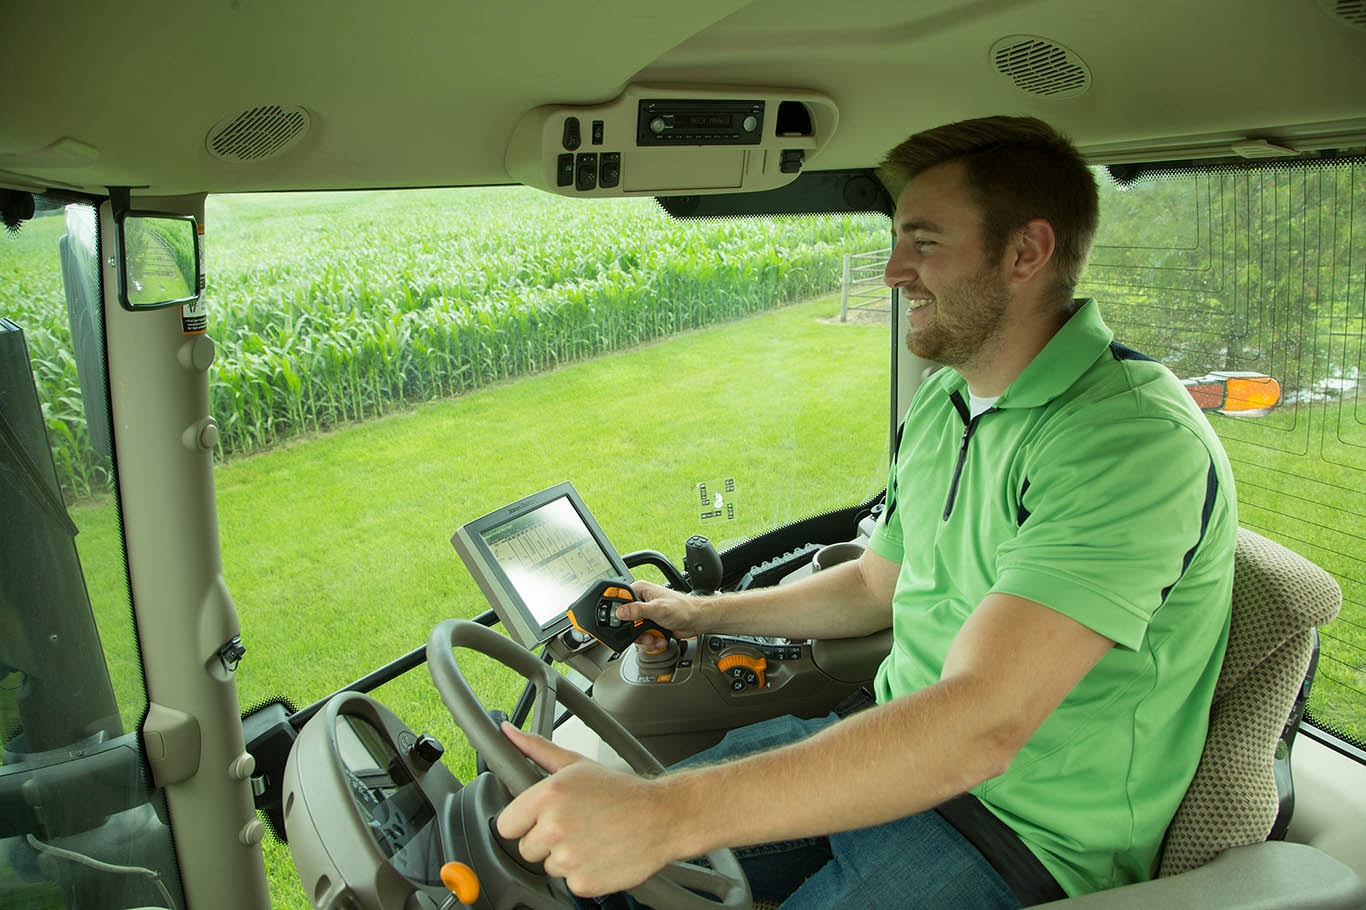 CommandPro provides operators with a more comfortable and less tiring way to control and drive the tractor.